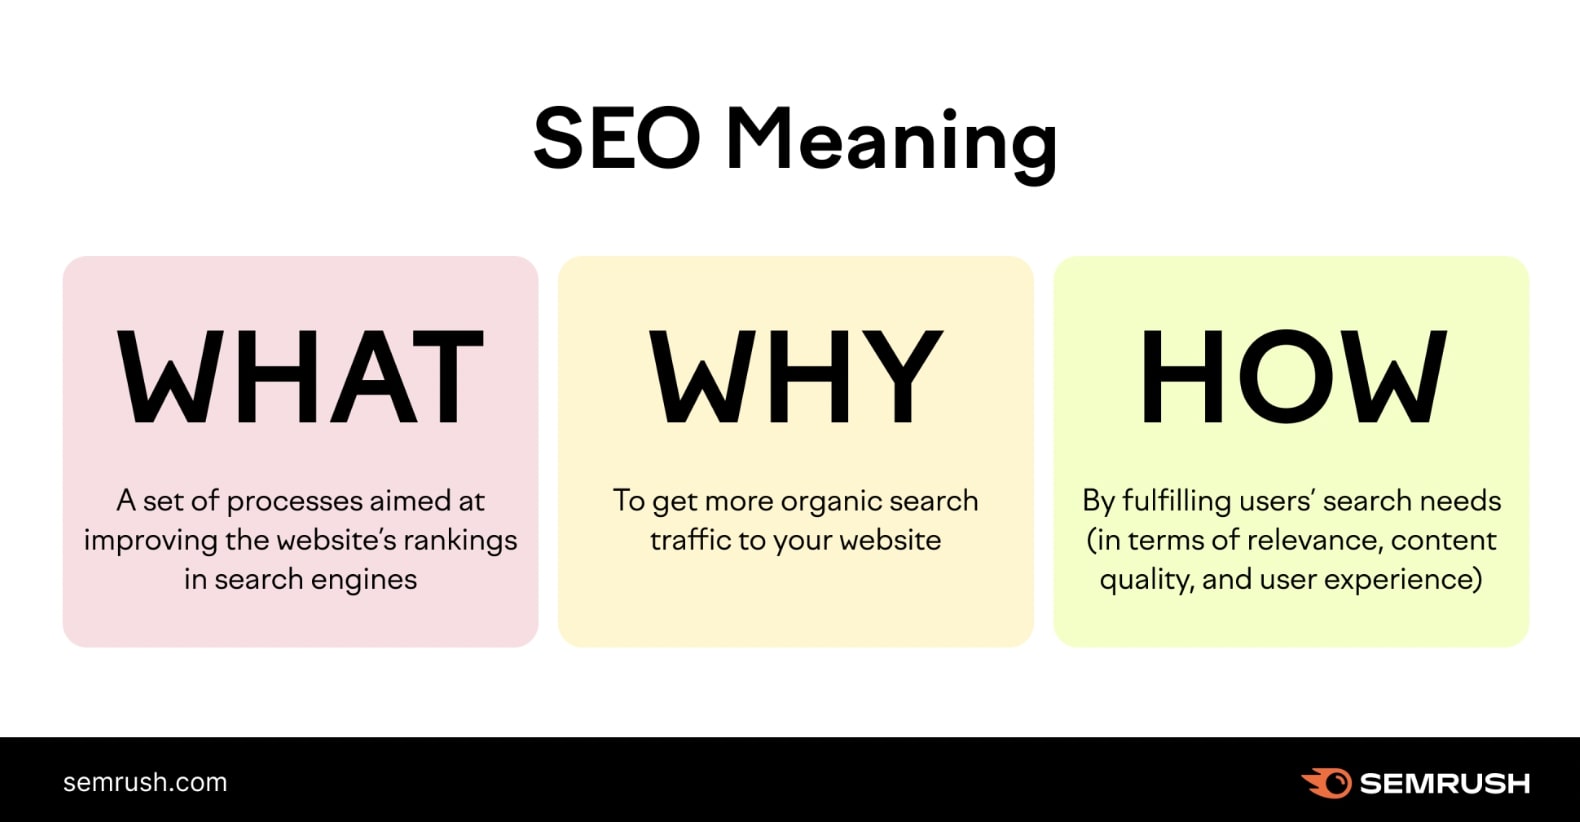 The "what," "why," and "how" of SEO